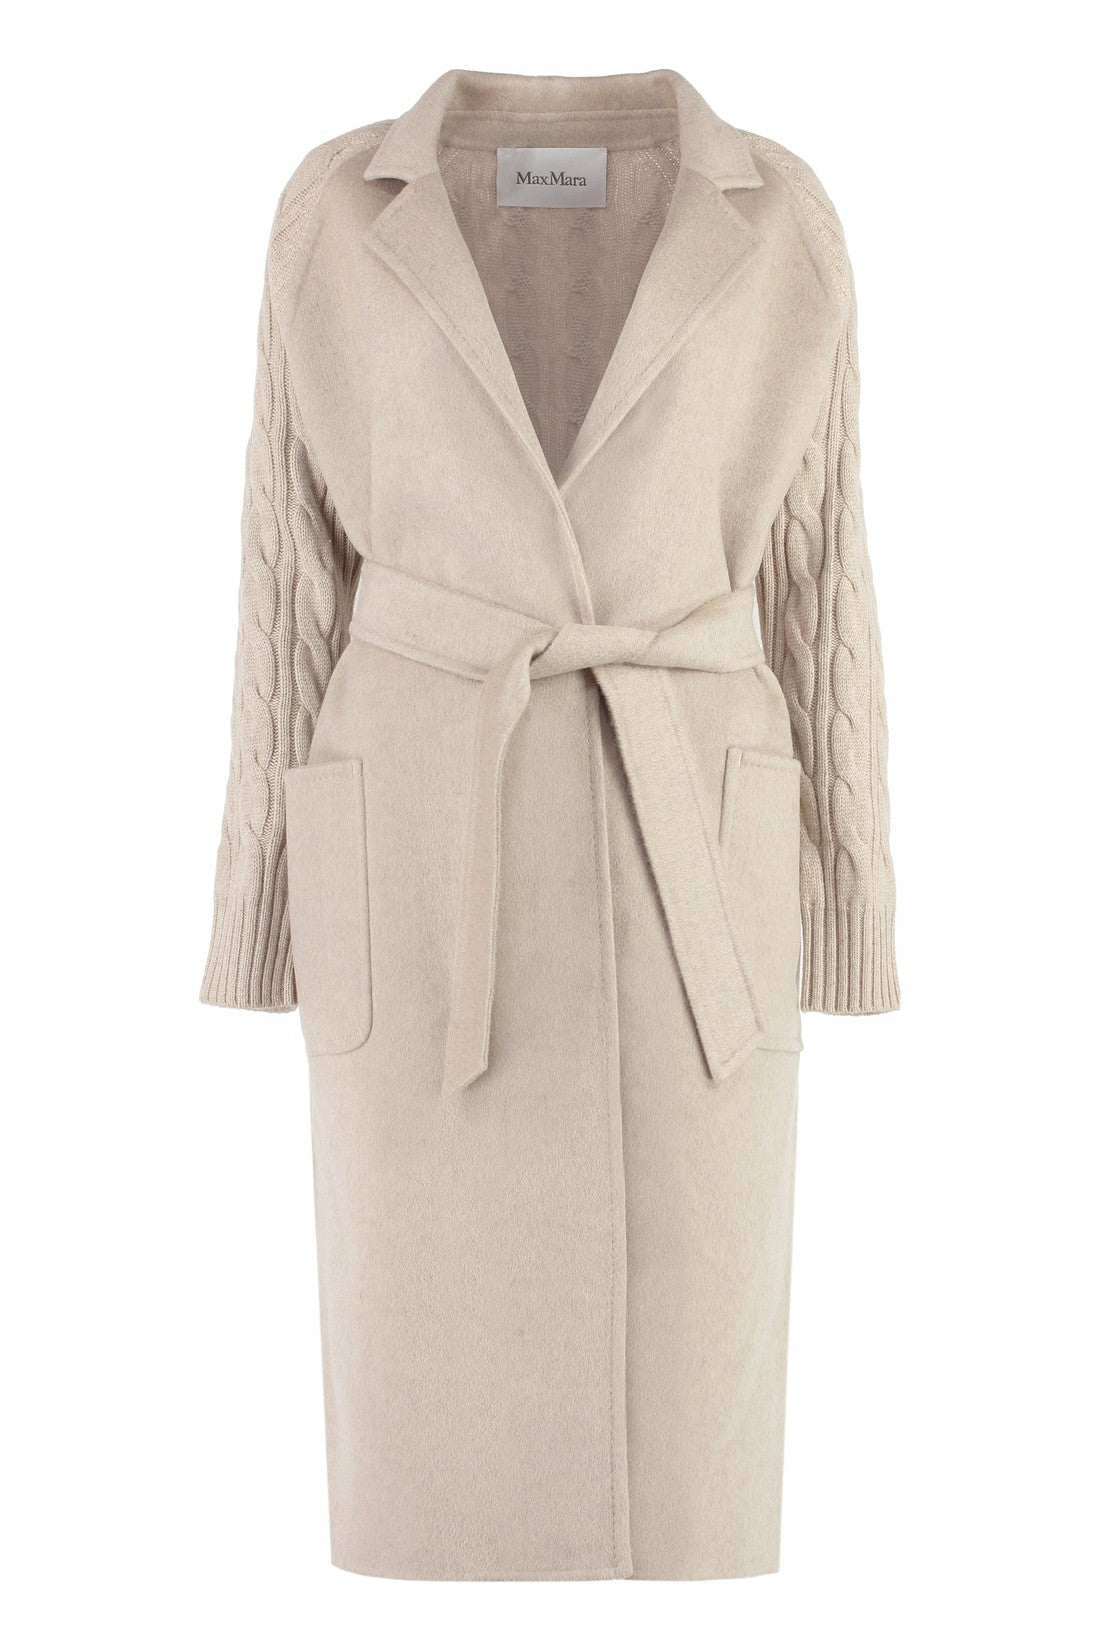 Max Mara-OUTLET-SALE-Hello wool and cashmere coat-ARCHIVIST